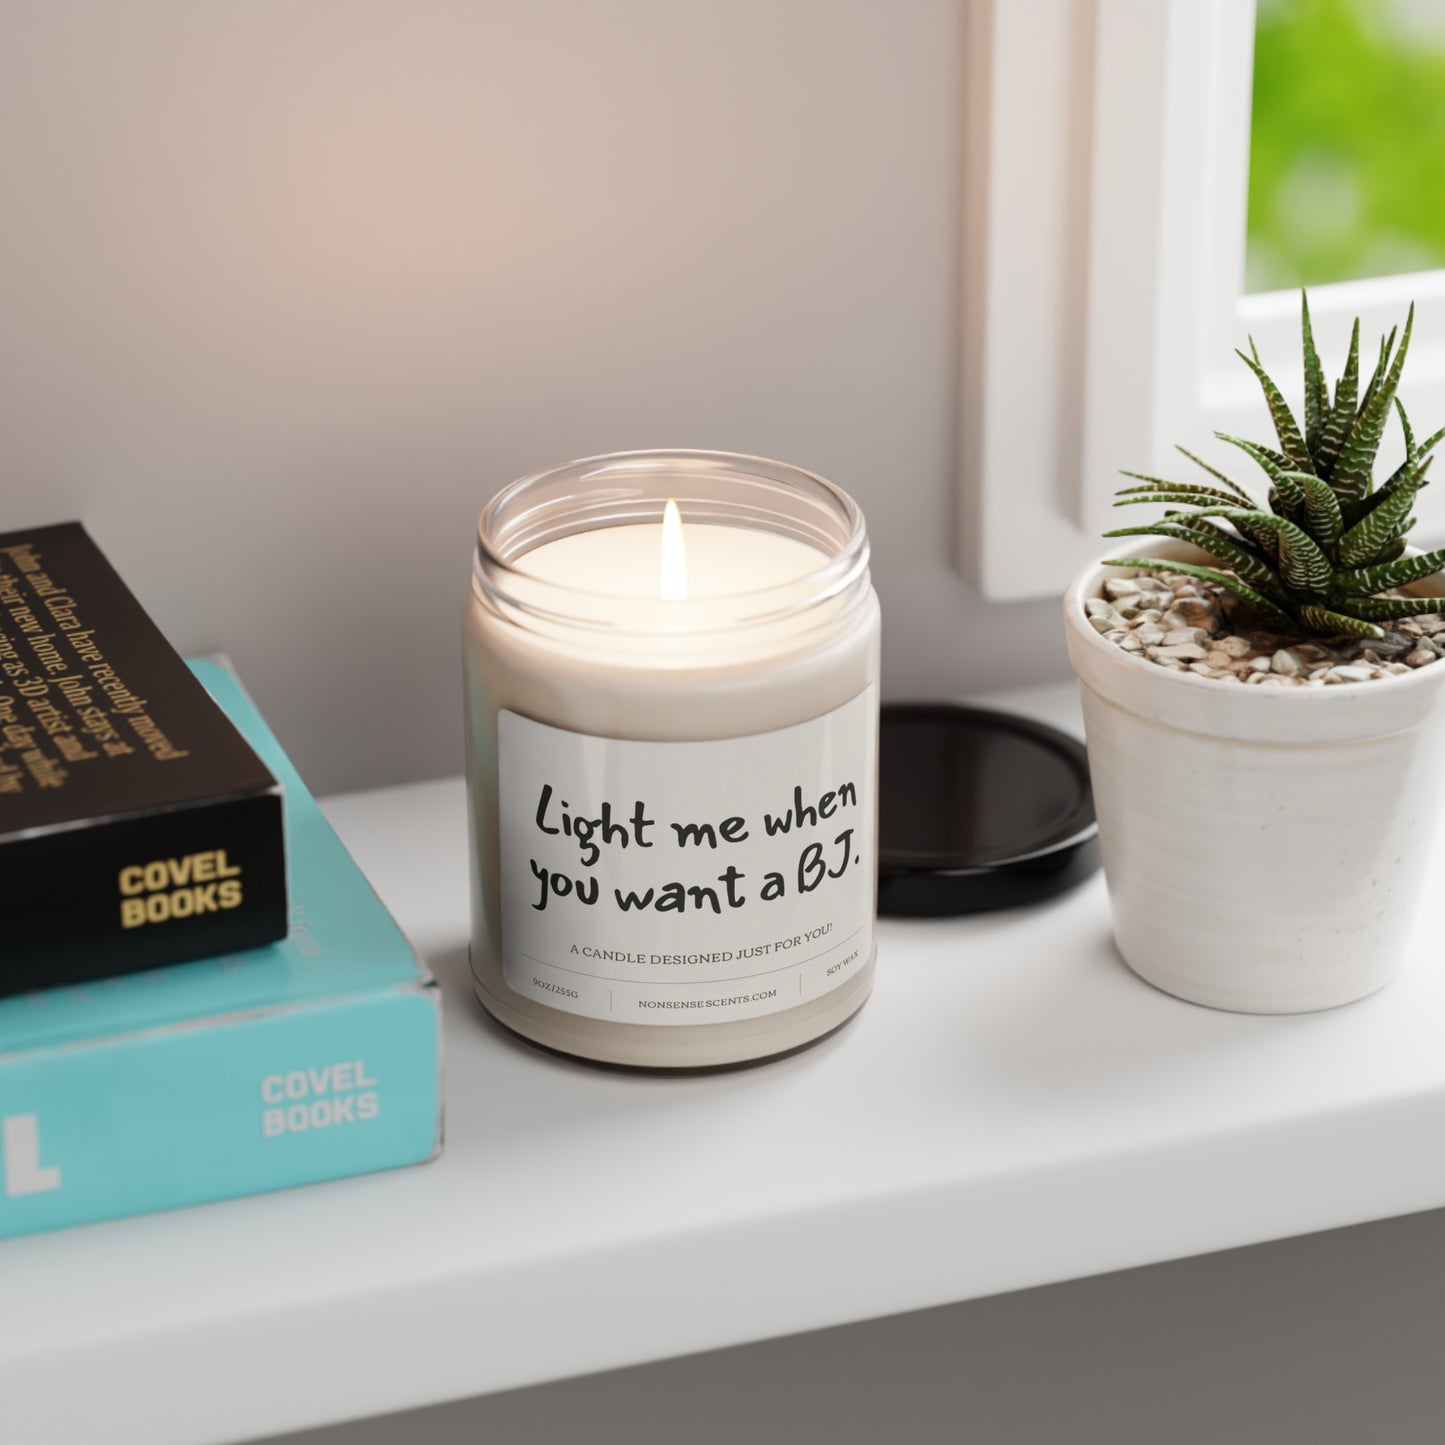 "Light Me When You Want A BJ" Scented Candle